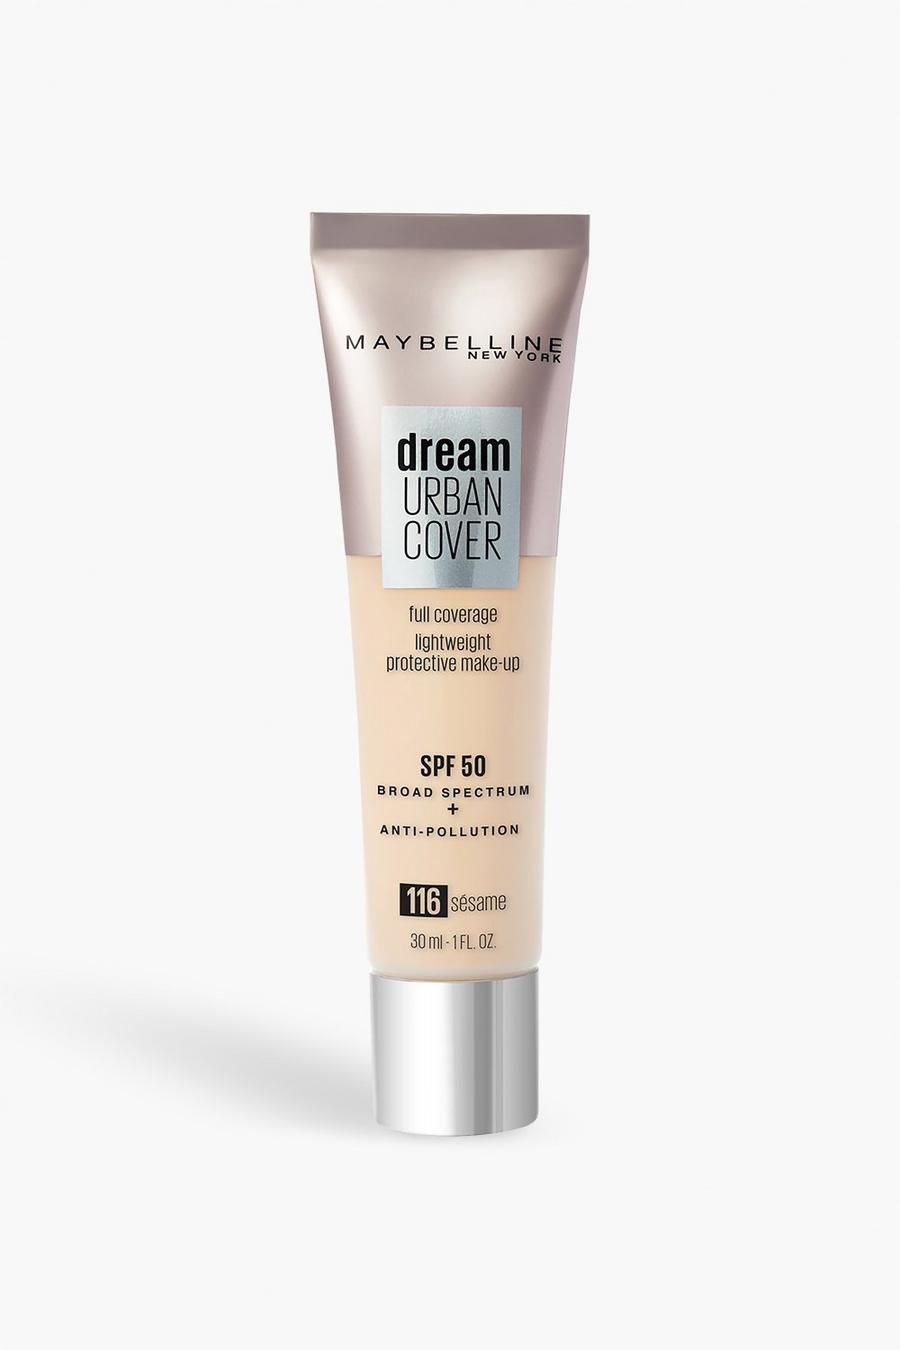 Beige Maybelline Dream Urban Cover All-In-One Protective Foundation SPF 50 - 116 Sesame image number 1